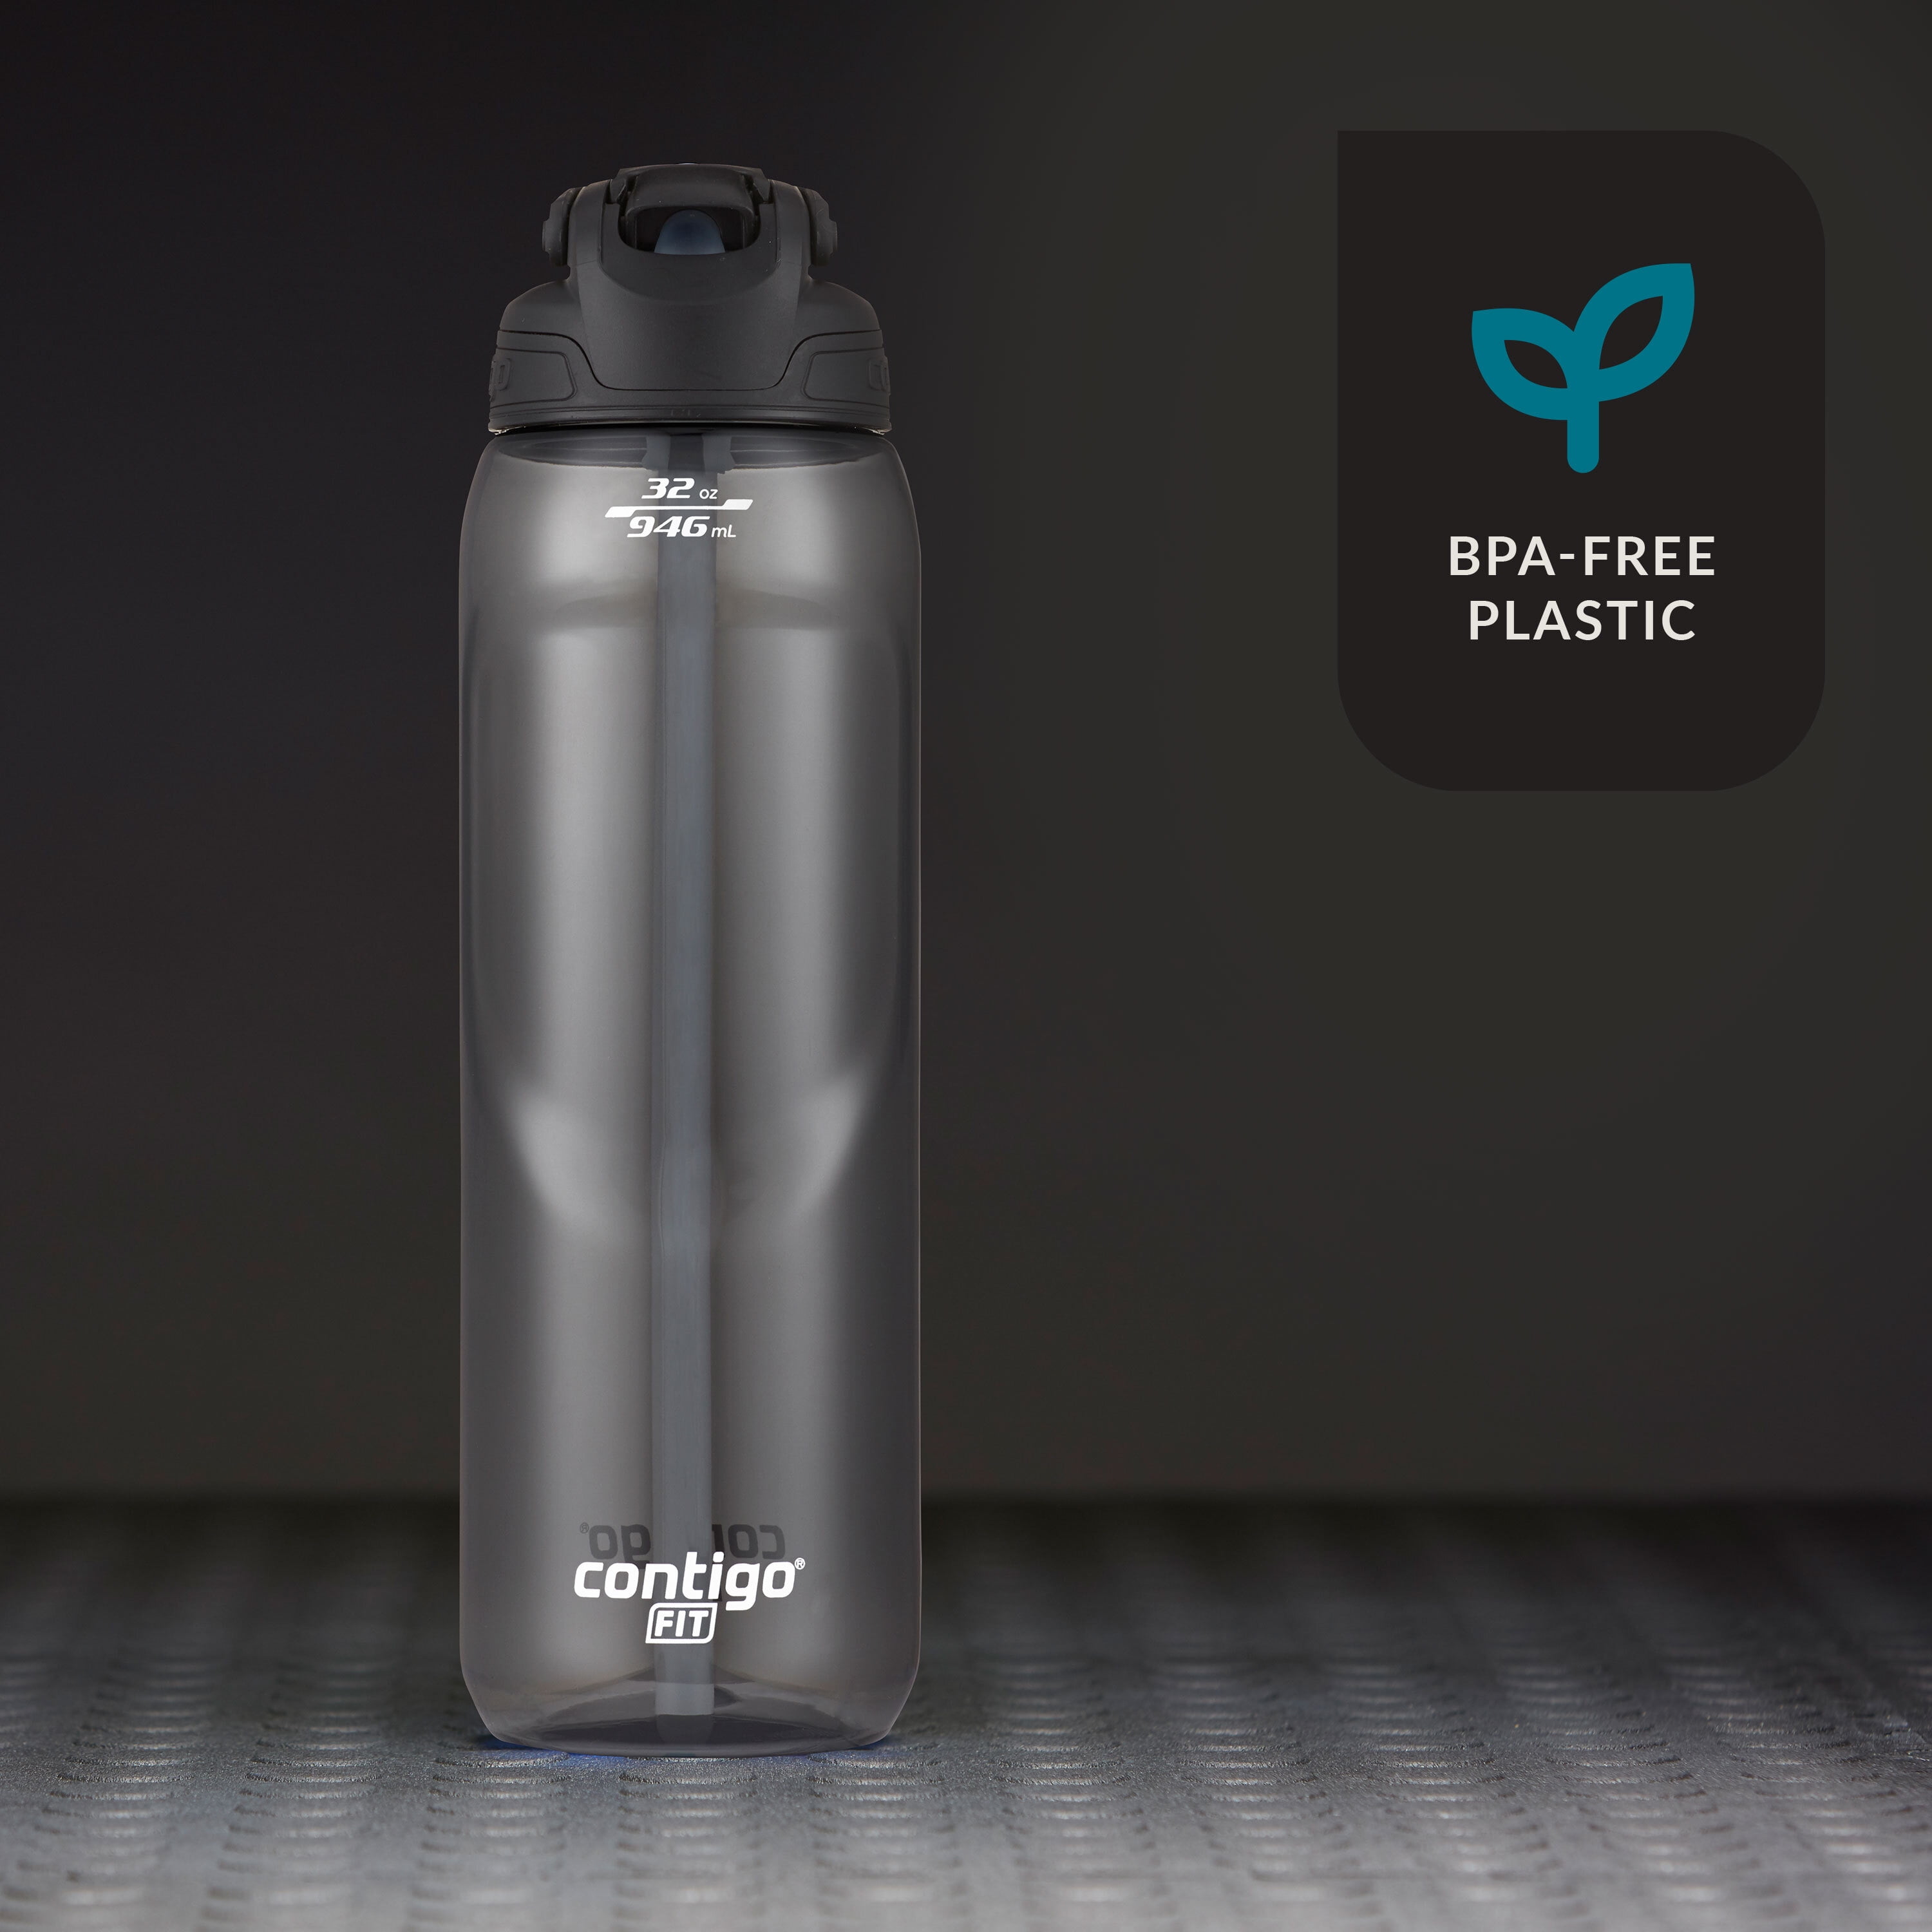 Fit Water Bottle with AUTOSPOUT® Straw 32oz